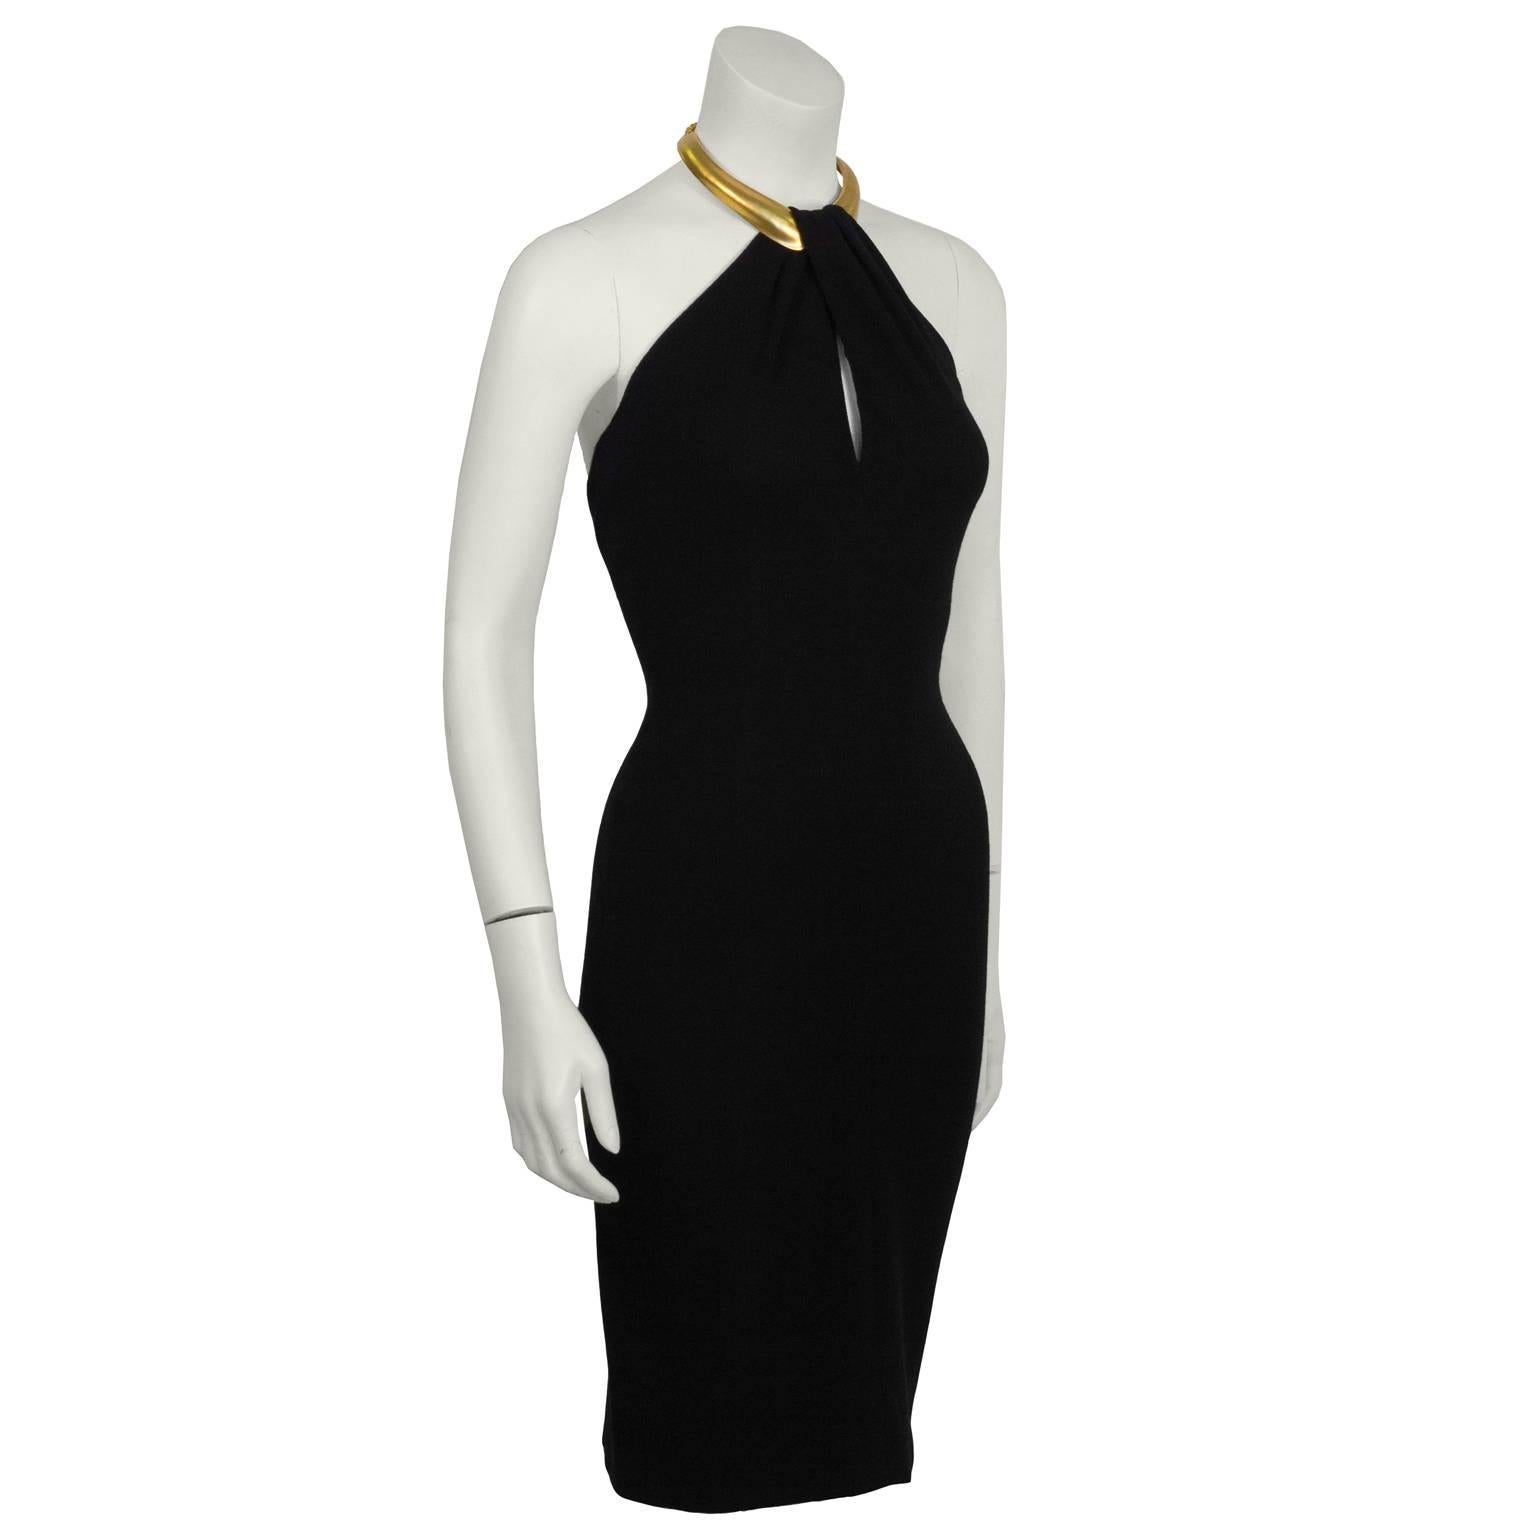 This Donna Karan black halter mini dress from the early 1990's is the ultimate sexy LBD. The stretch fabric body con dress features a matte gold Robert Lee Morris choker with a chain clasp, and a key hole slit. Excellent vintage condition. US size